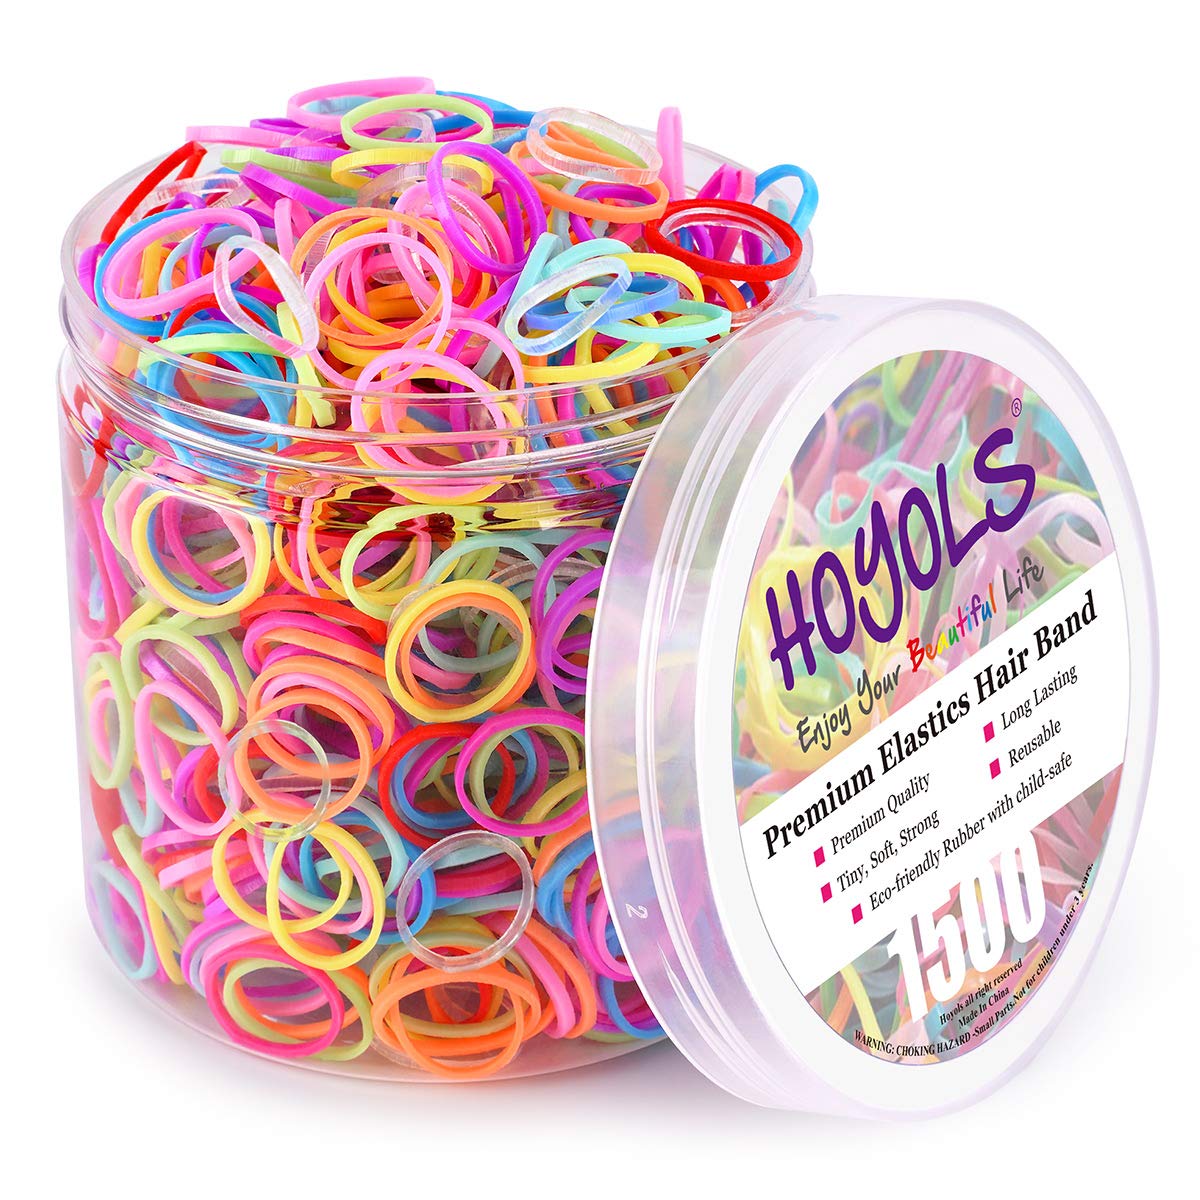 Small Toddler Elastics Mini Hair Ties 10 Colored Rubber Bands for Hair Ponytail Holders for Baby Girl Infants, Ligas Para Cabello 1500 pcs by HOYOLS